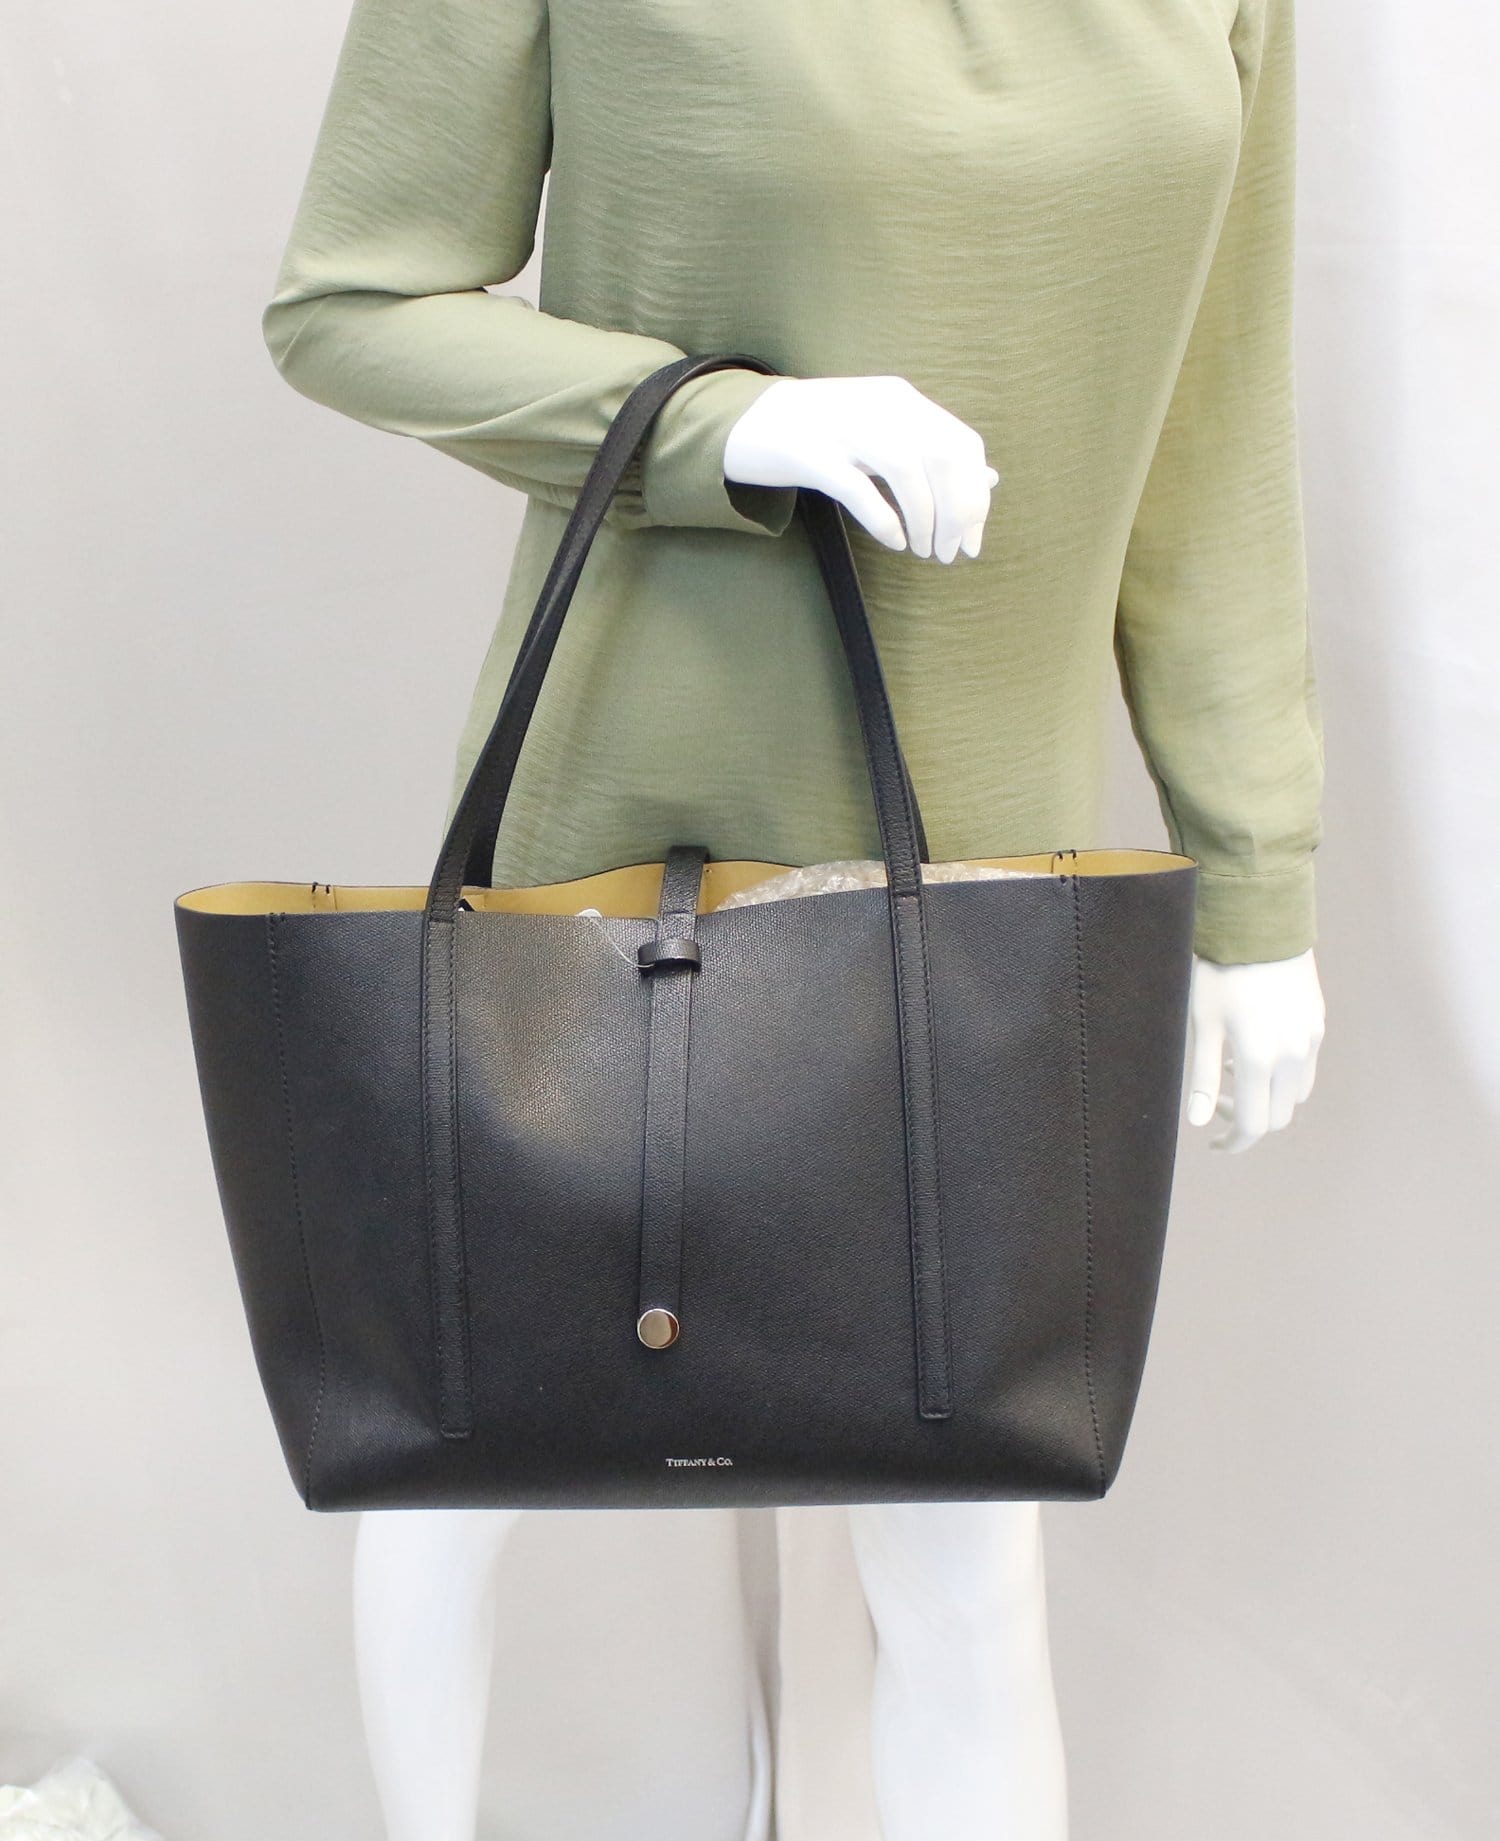 Tiffany & Co. Black Textured Reversible Leather Tote Bag TT2217